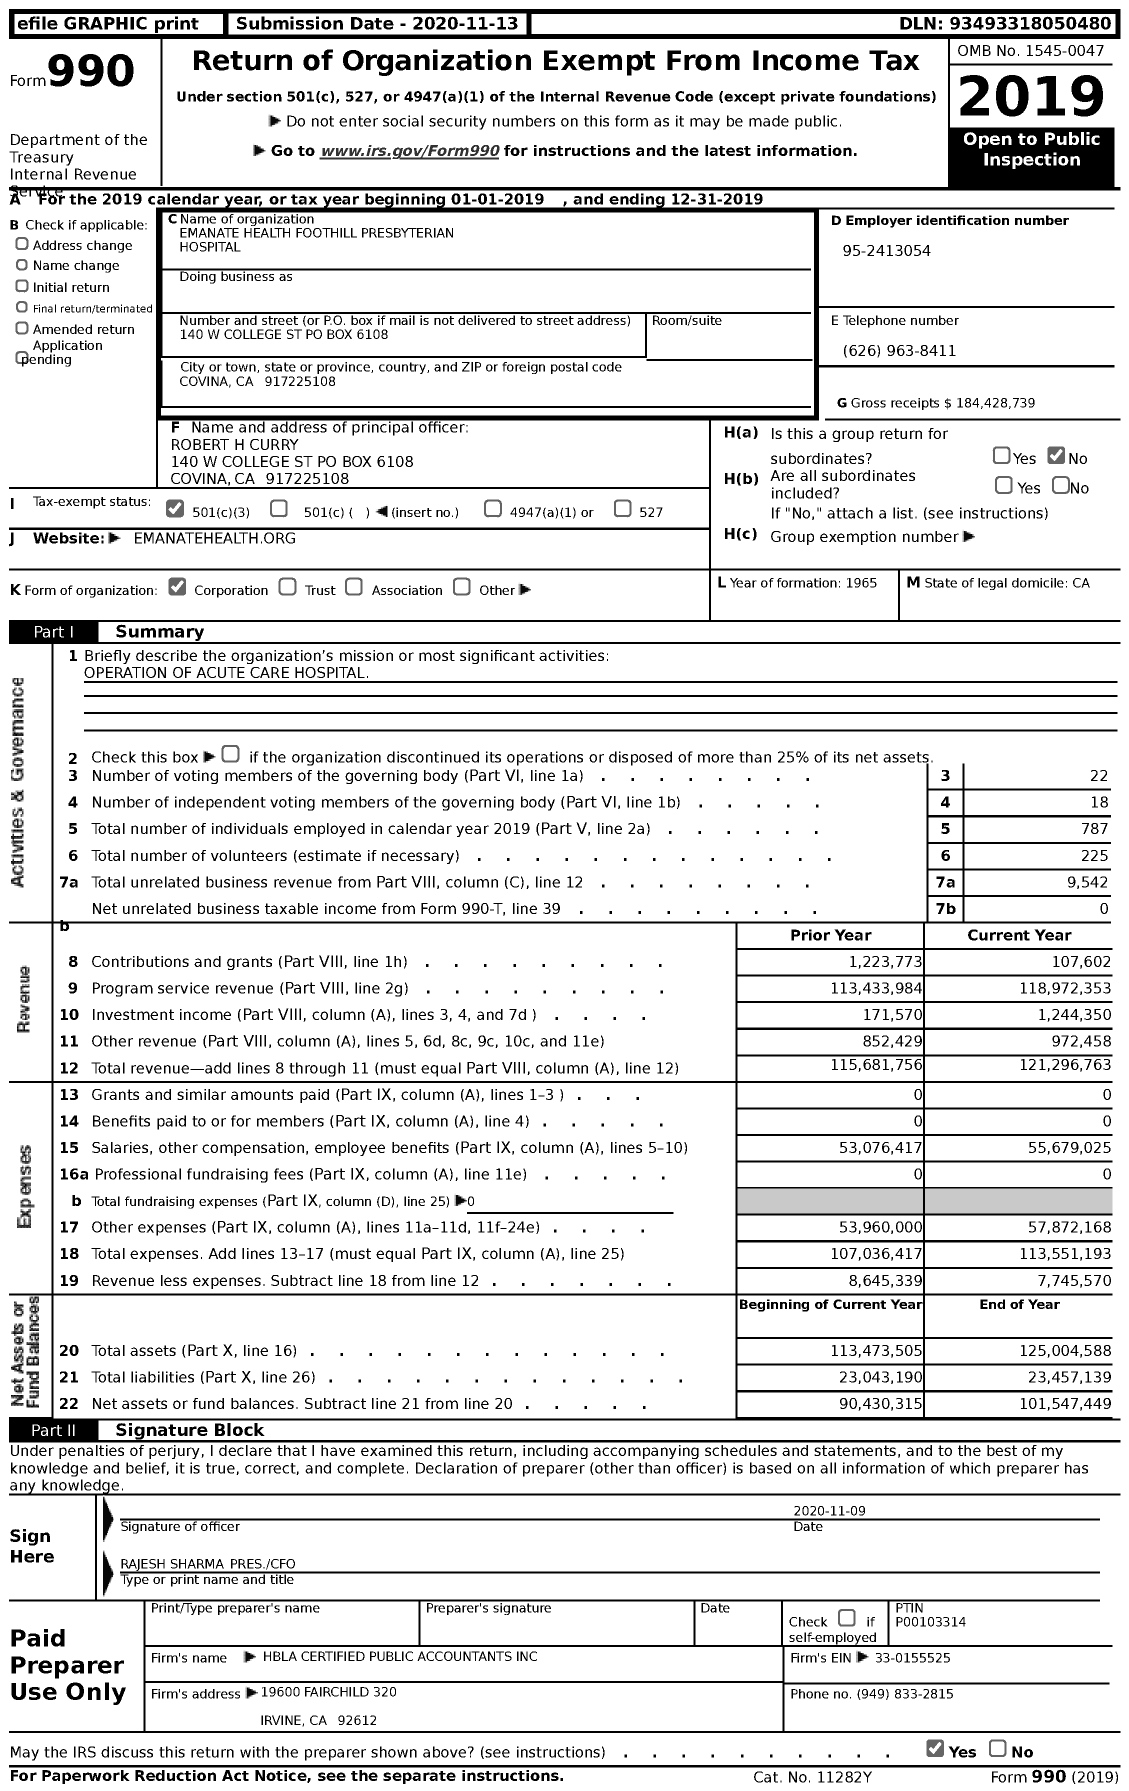 Image of first page of 2019 Form 990 for Emanate Health Foothill Presbyterian Hospital